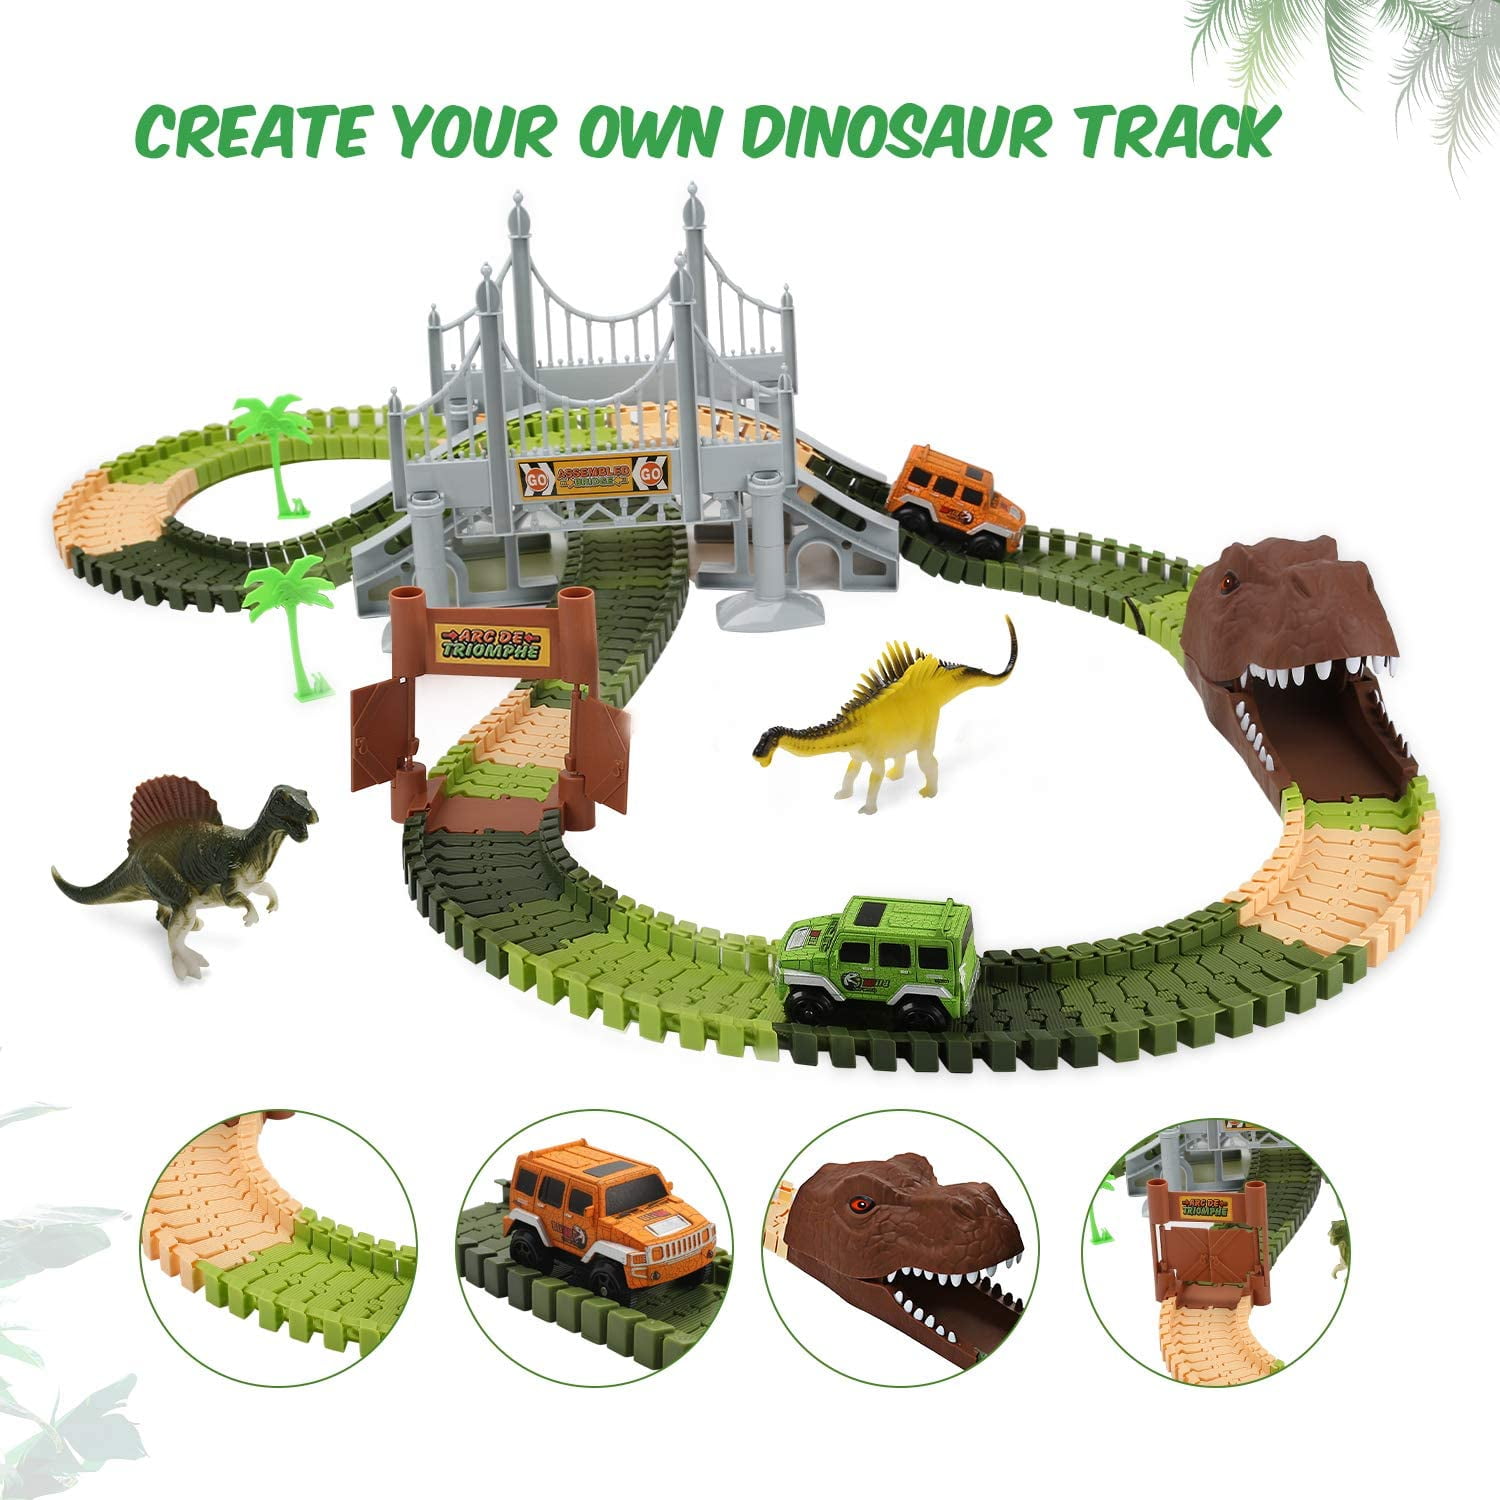 Flexible Train Tracks with 2 Dinosaurs Figures,1 Bridge,2 Electric Cars Vehicle Playset with LED Lights,Best Gift for Toddlers Boys and Girls EagleStone Dinosaur Toys Race Track Set 194 PCS for Kids 